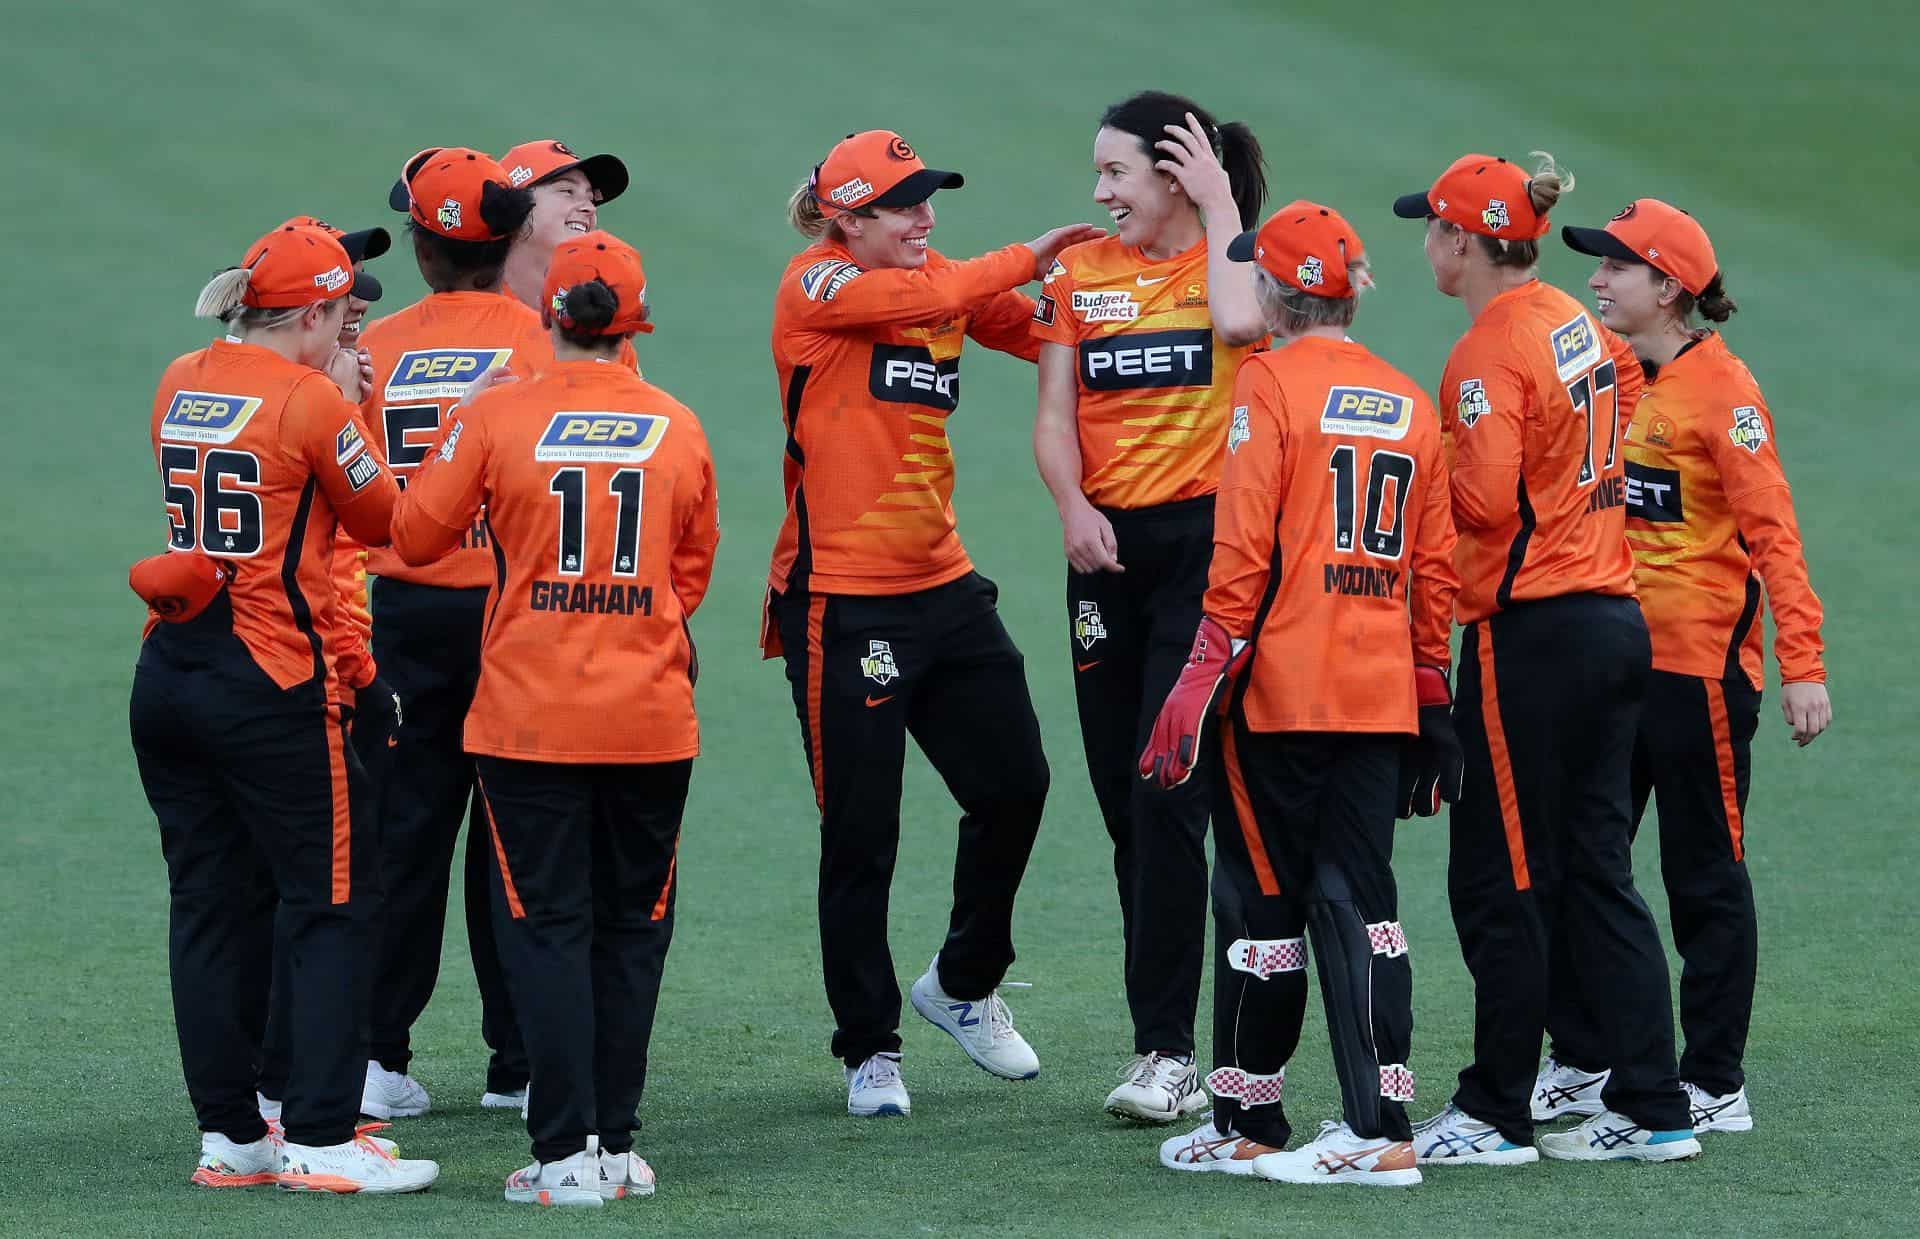 WBBL 2022: ST-W vs PS-W Match Preview, Probable Playing XI, Prediction